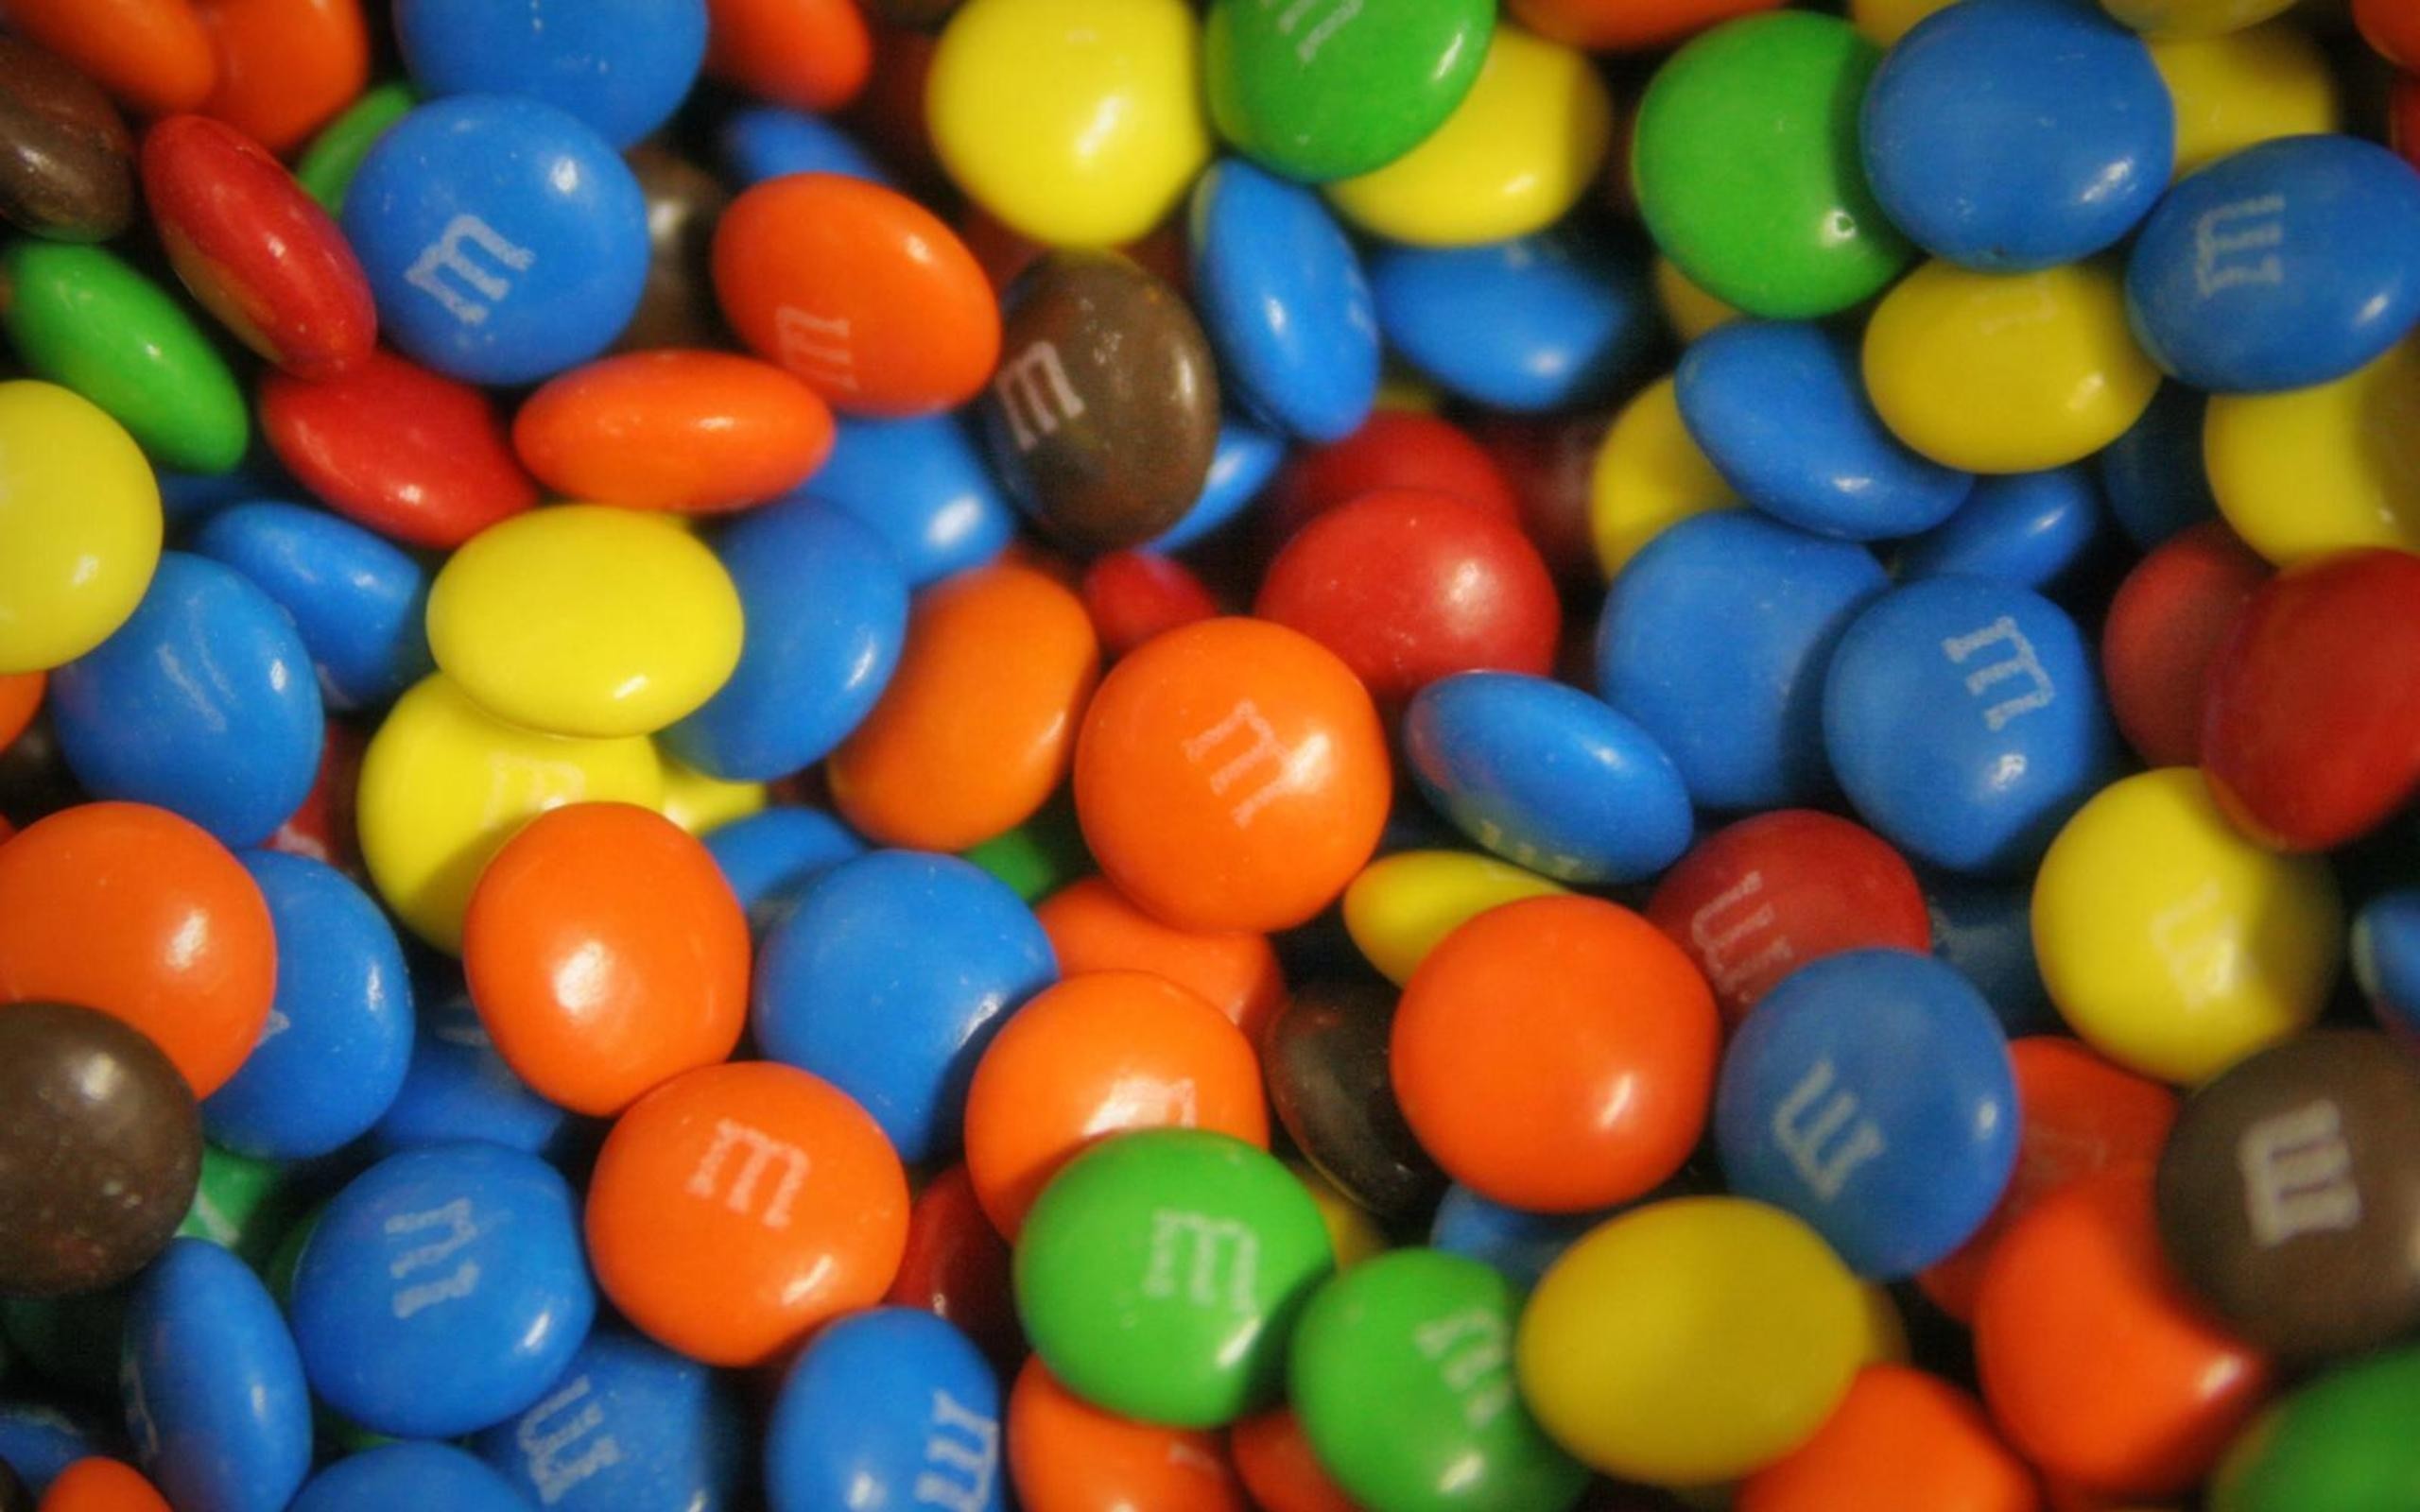 General 2560x1600 sweets colorful food m&m's